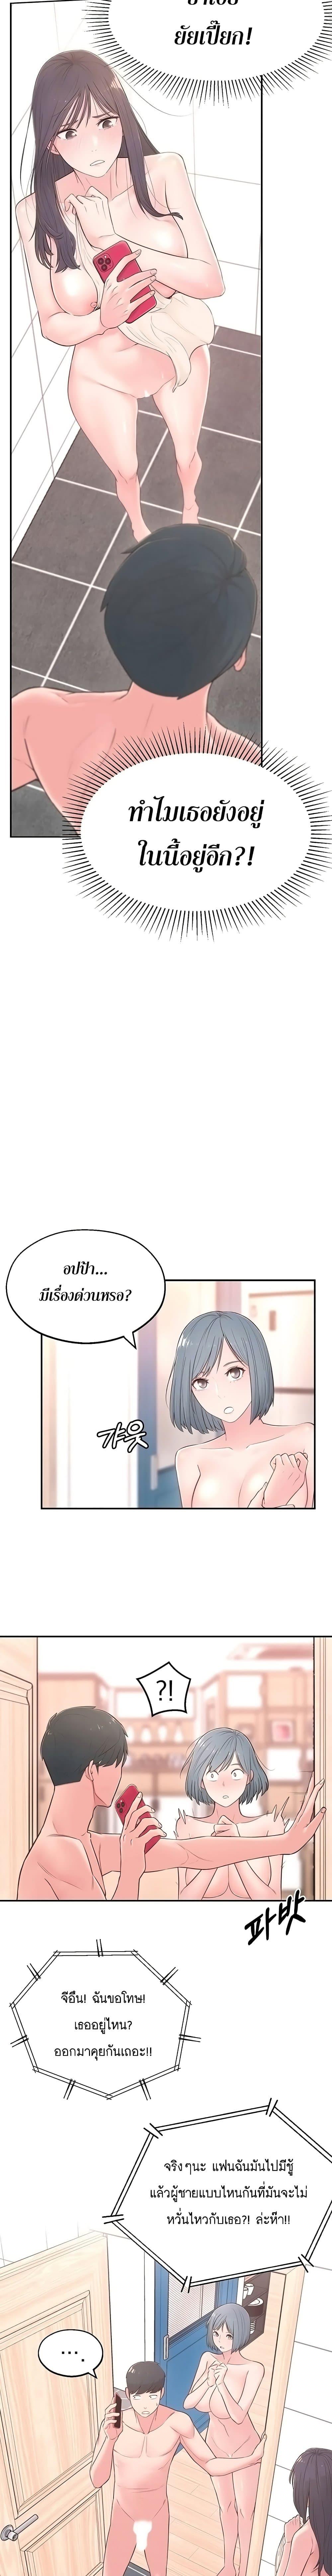 A Knowing Sister 4 ภาพ 5